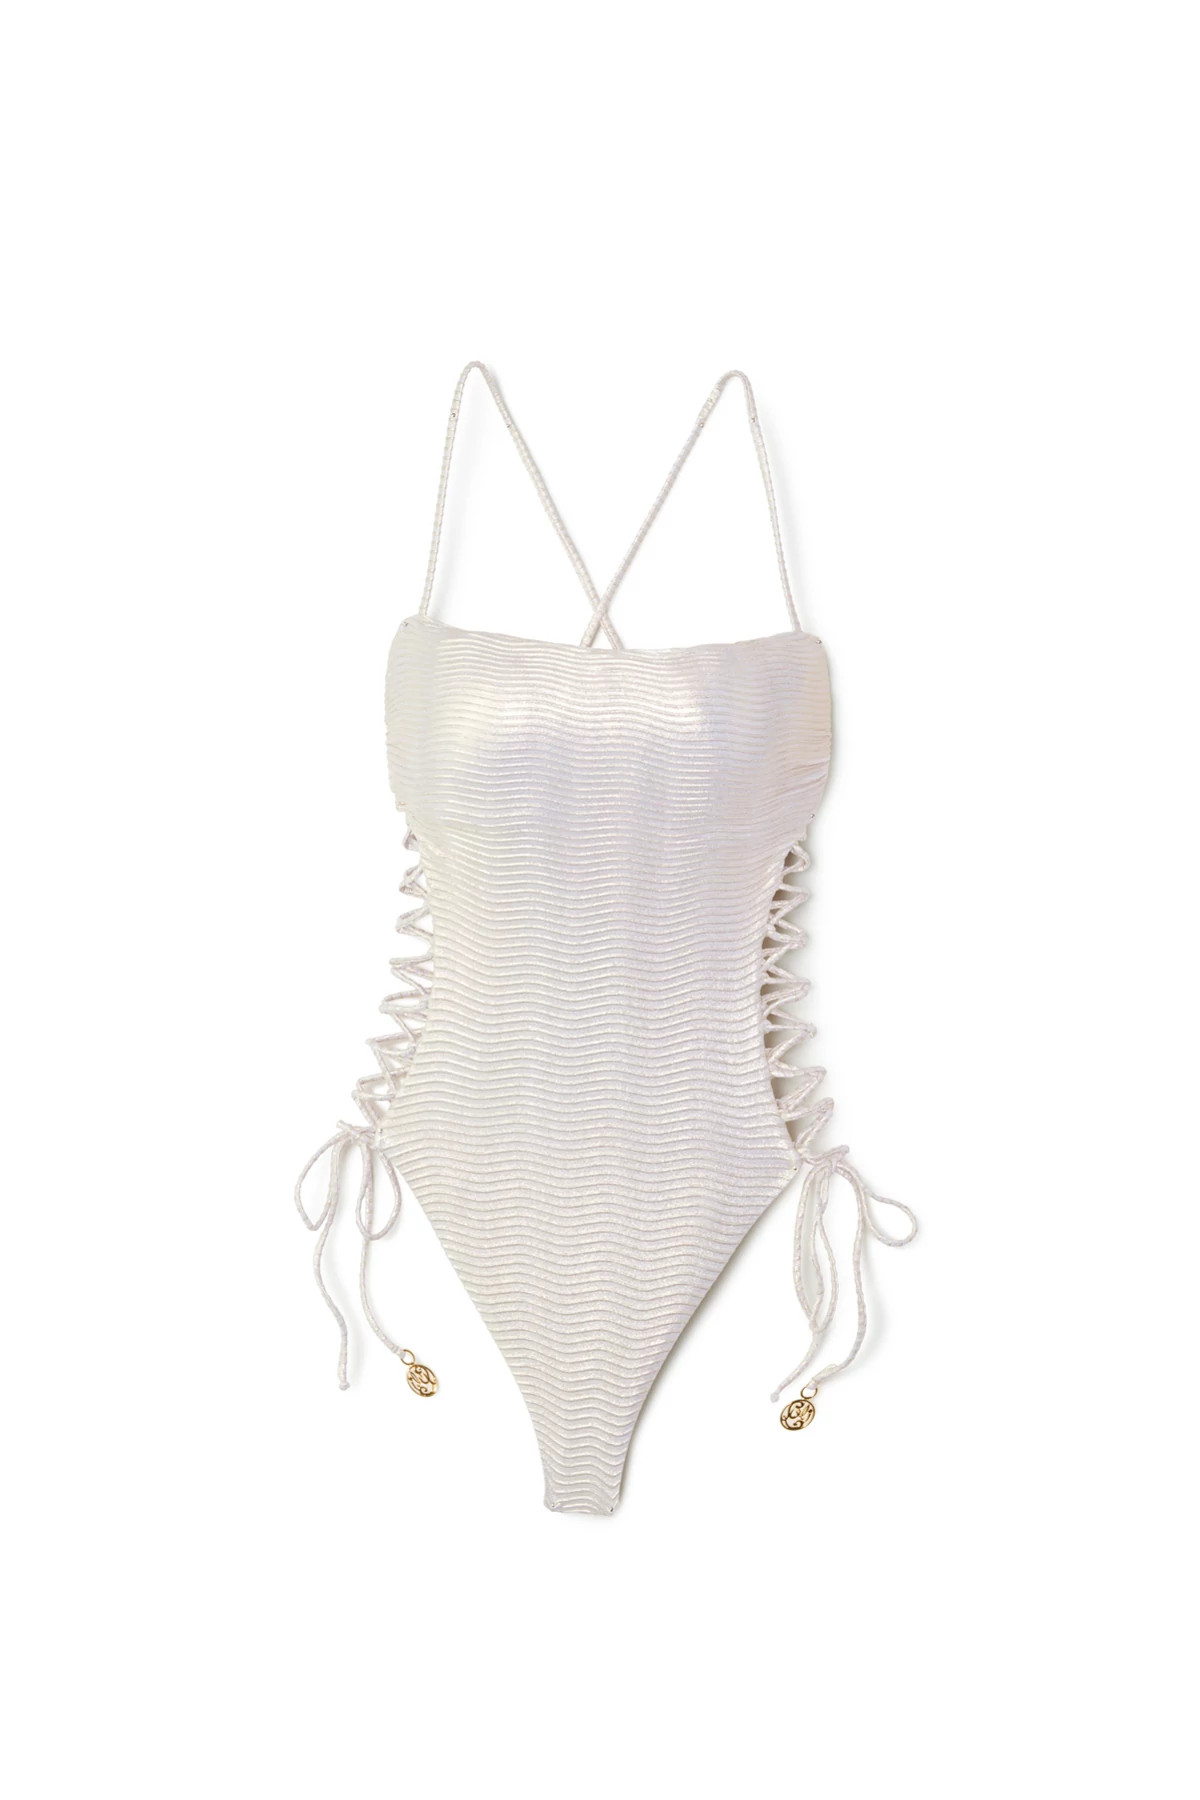 White Lace Up Back One Piece Swimsuit